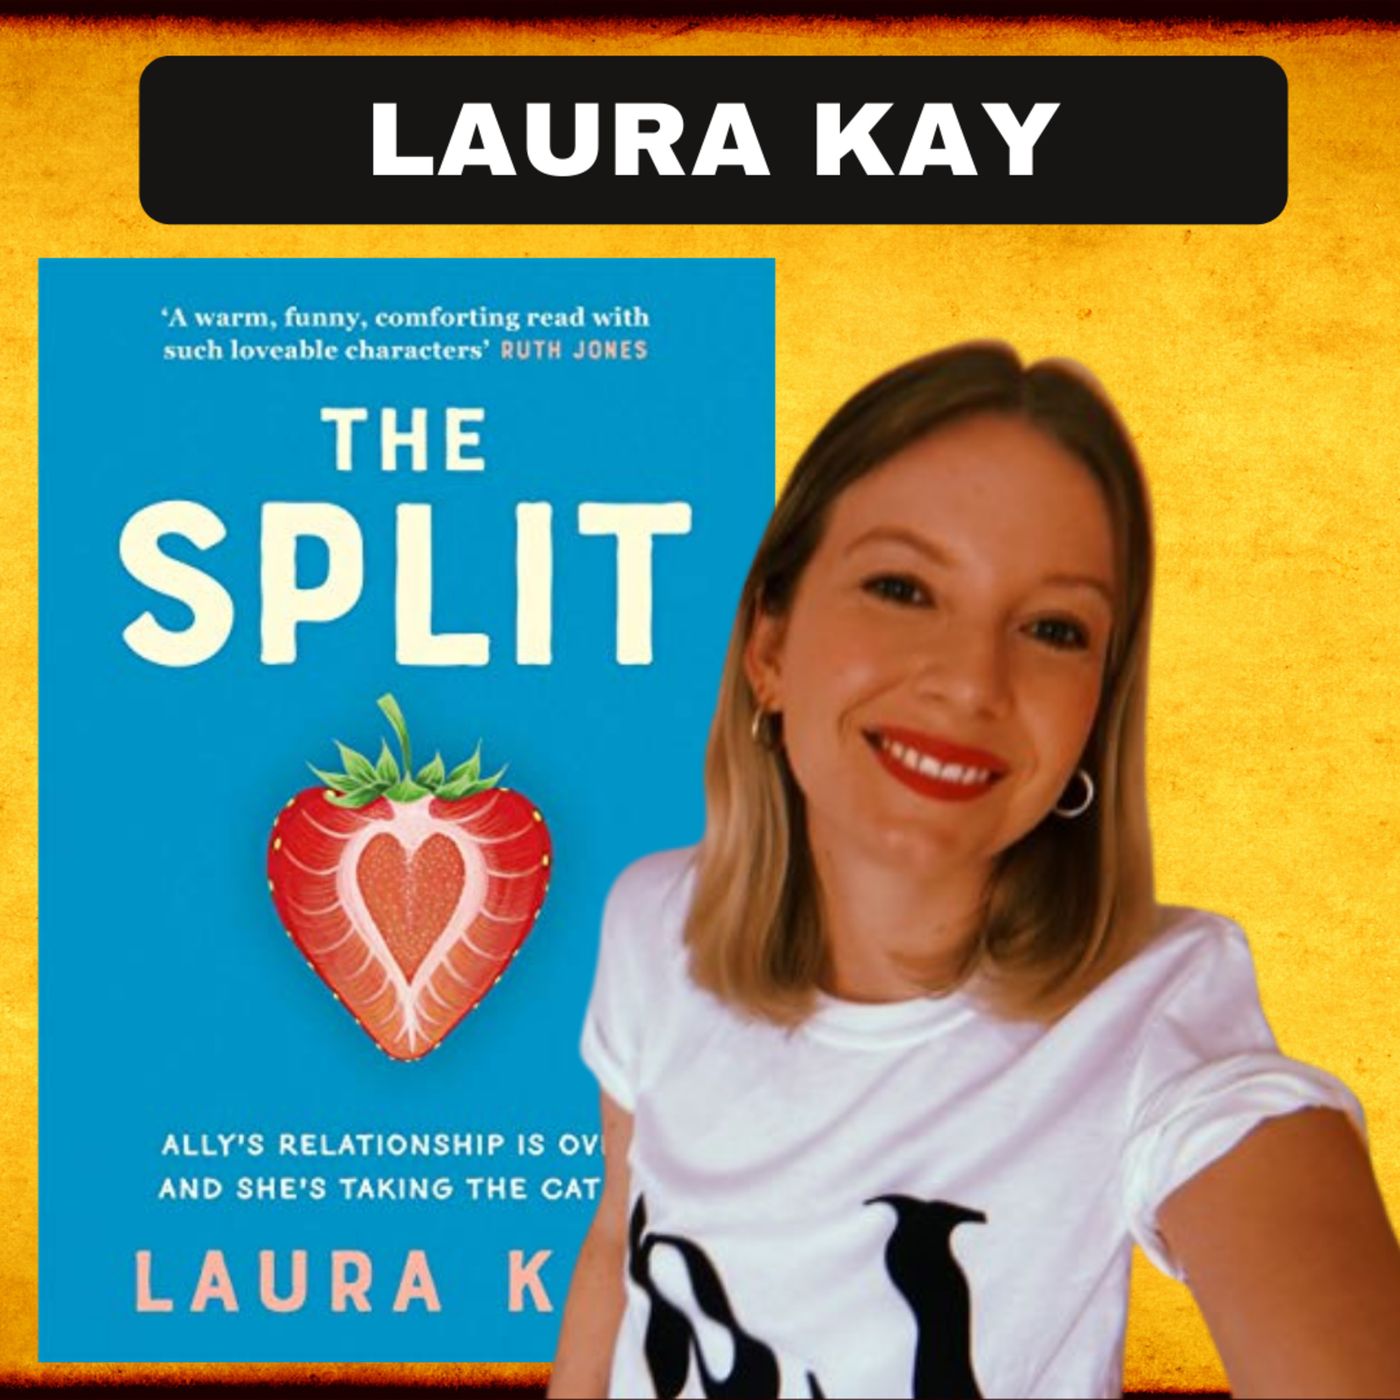 Laura Kay: Author of The Split on The Writing Community Chat Show.